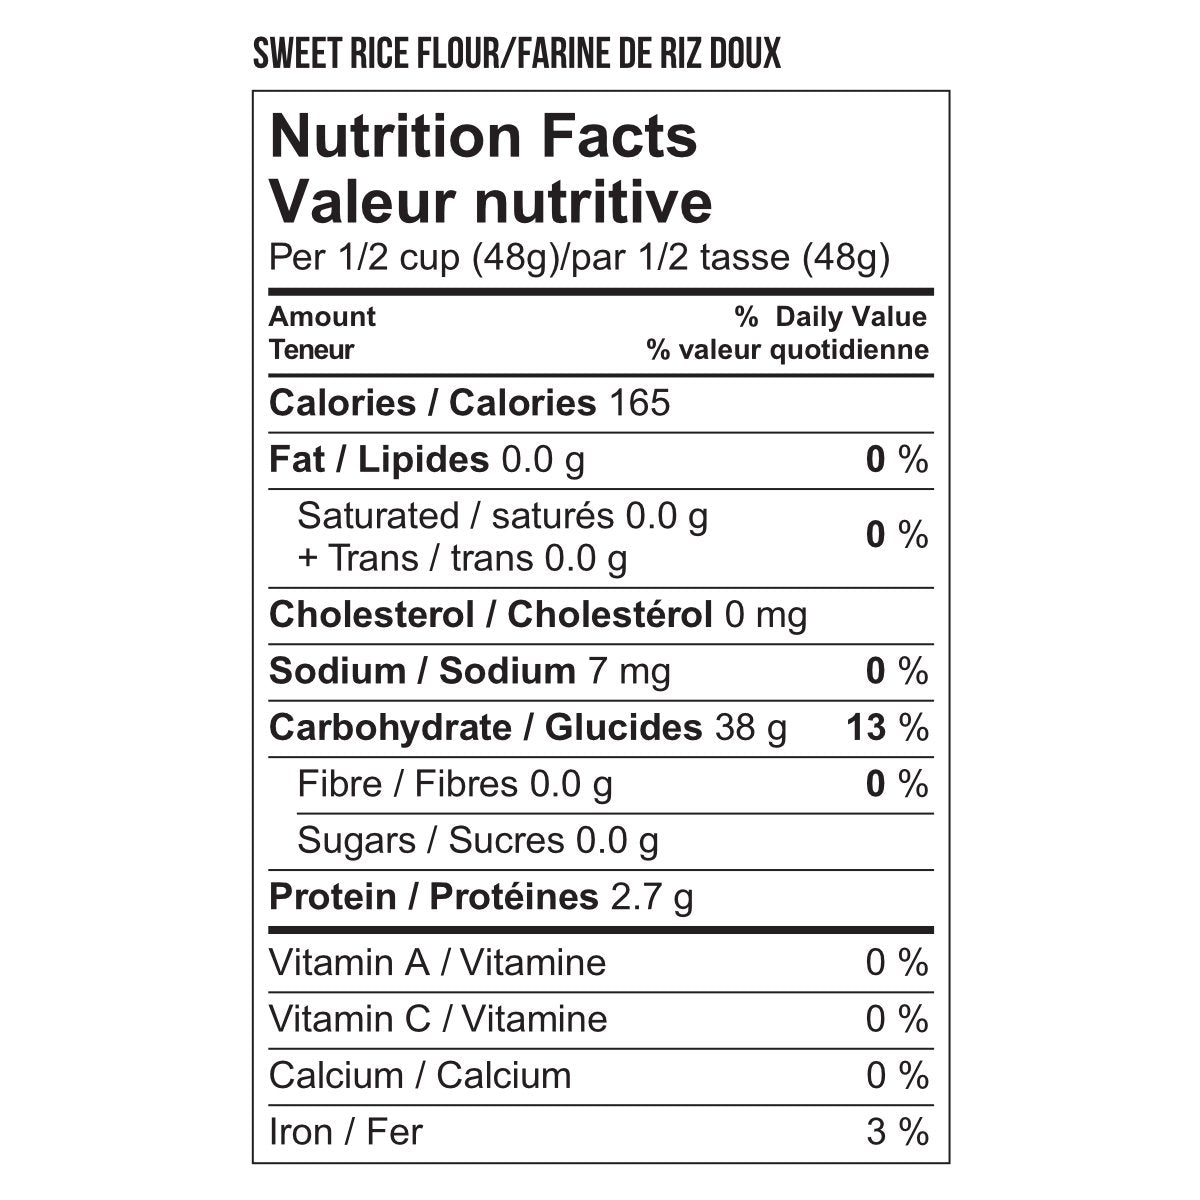 Nutritional information for Newtons No Gluten sweet rice flour